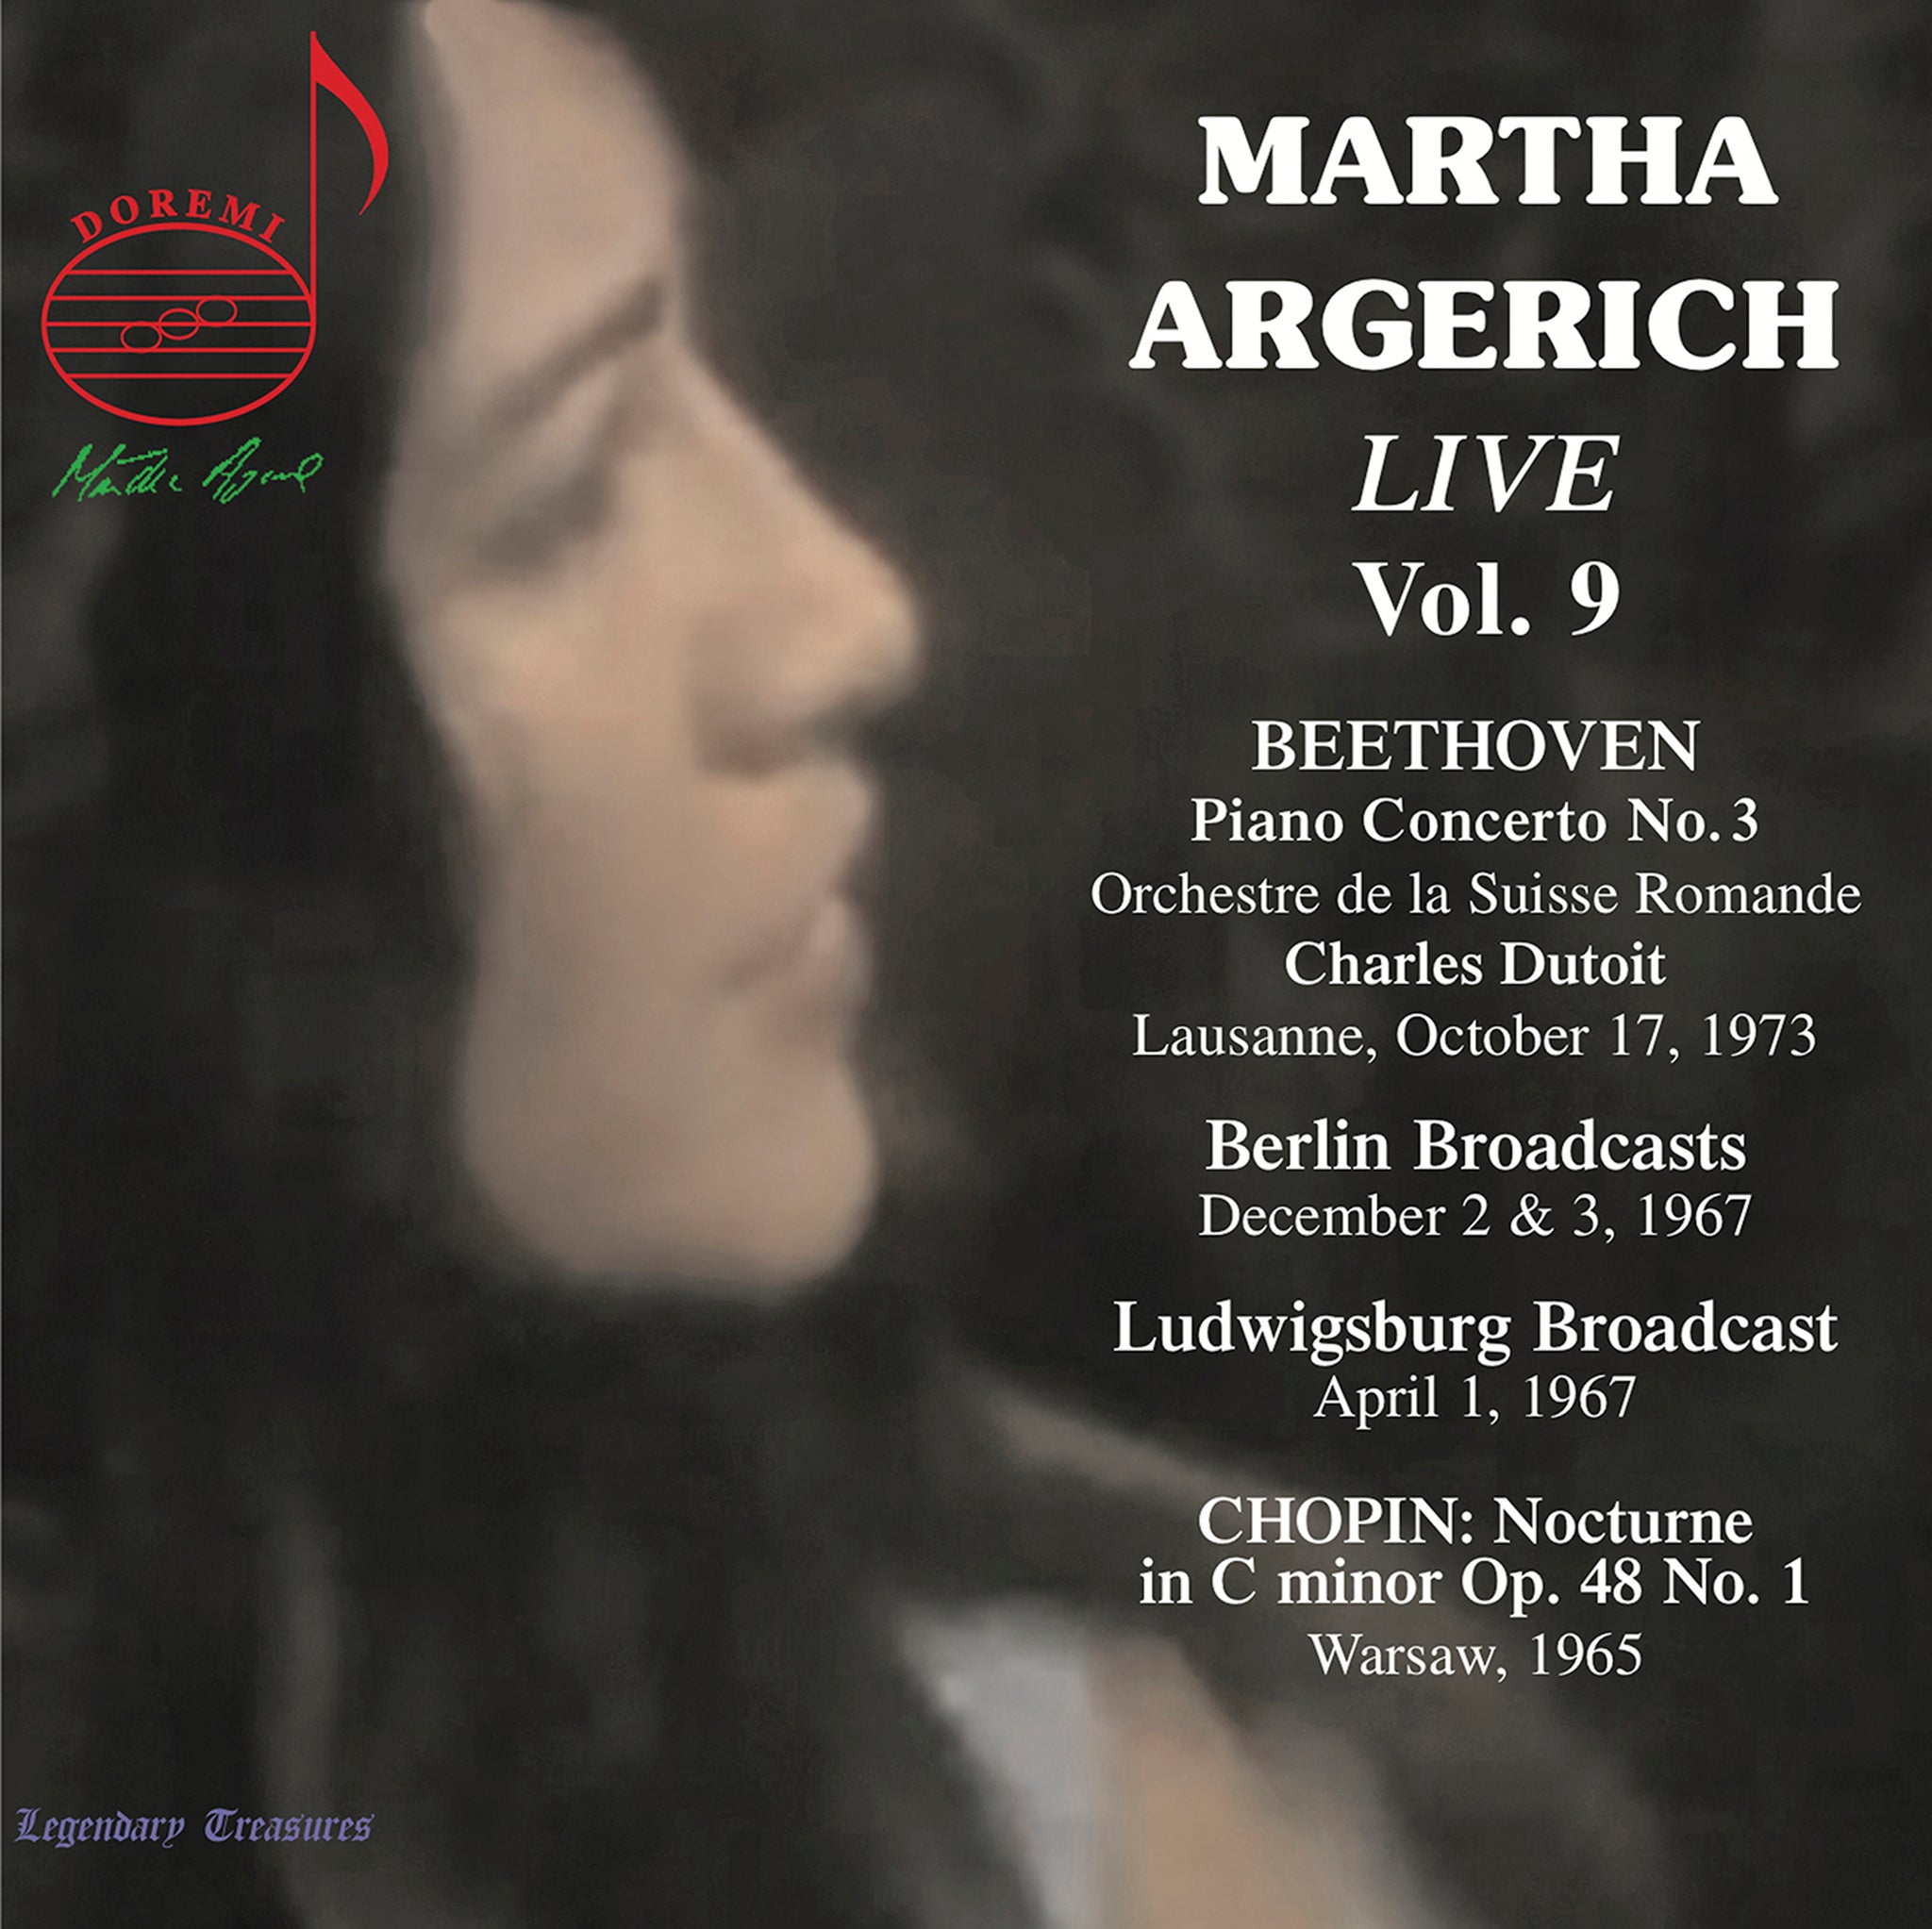 Martha Argerich Live, Vol. 9 - Beethoven & More, Onstage & On Air